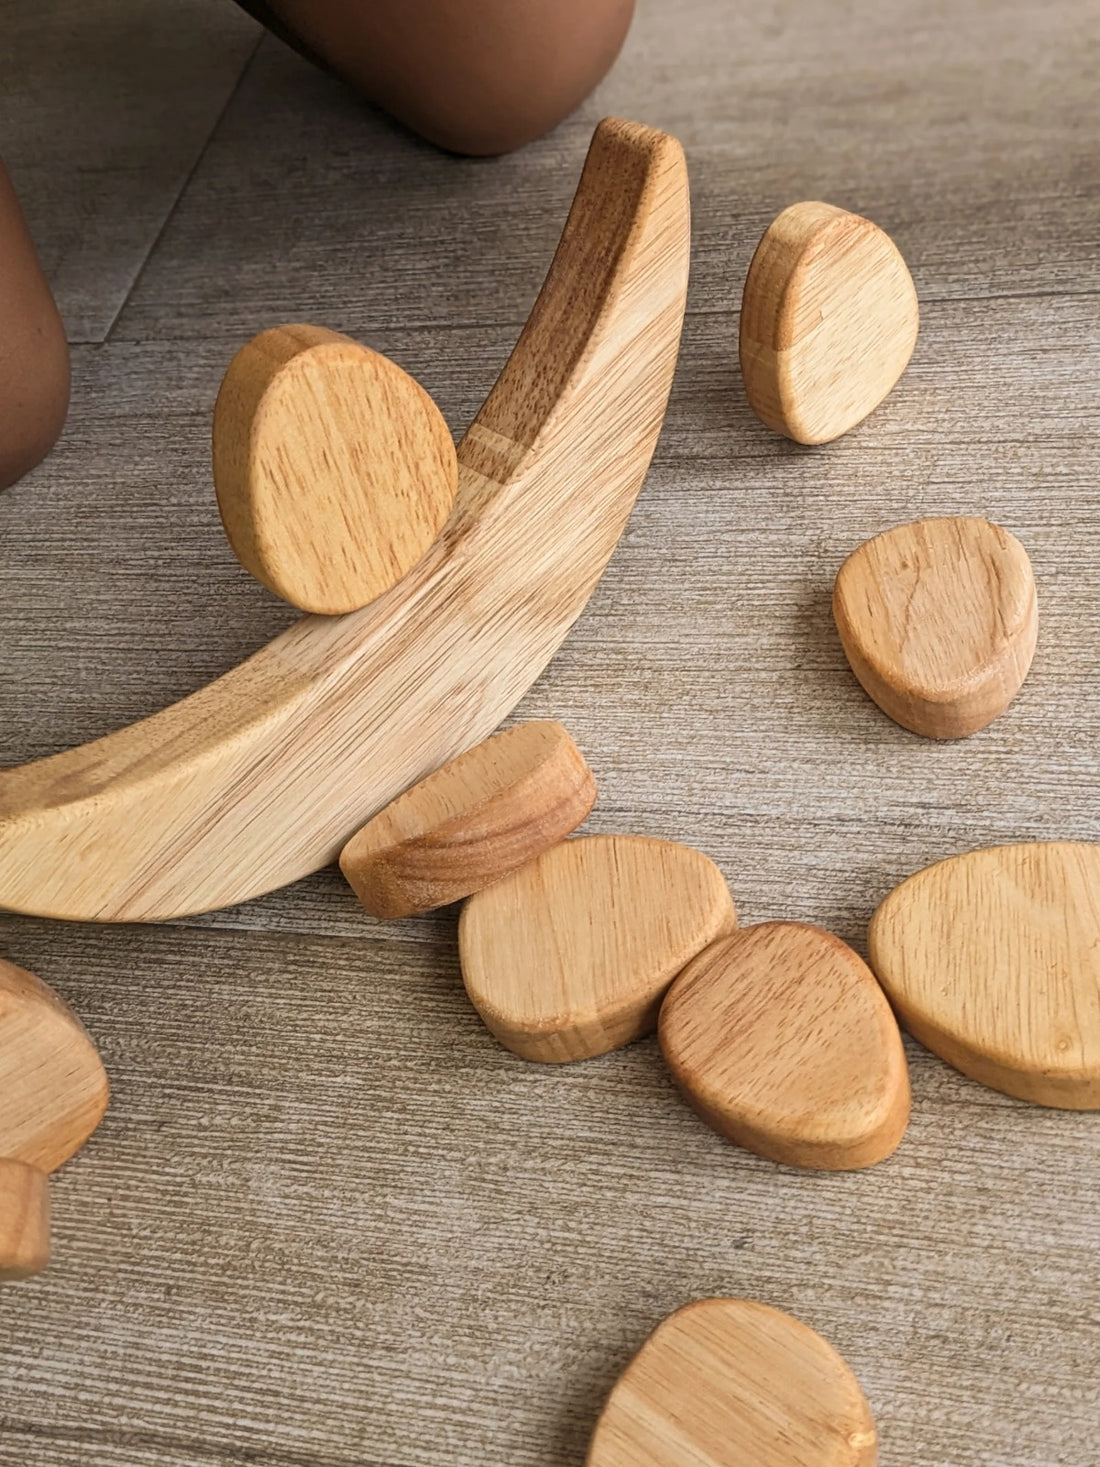 Ethical Consumerism: Choosing Wooden Toys